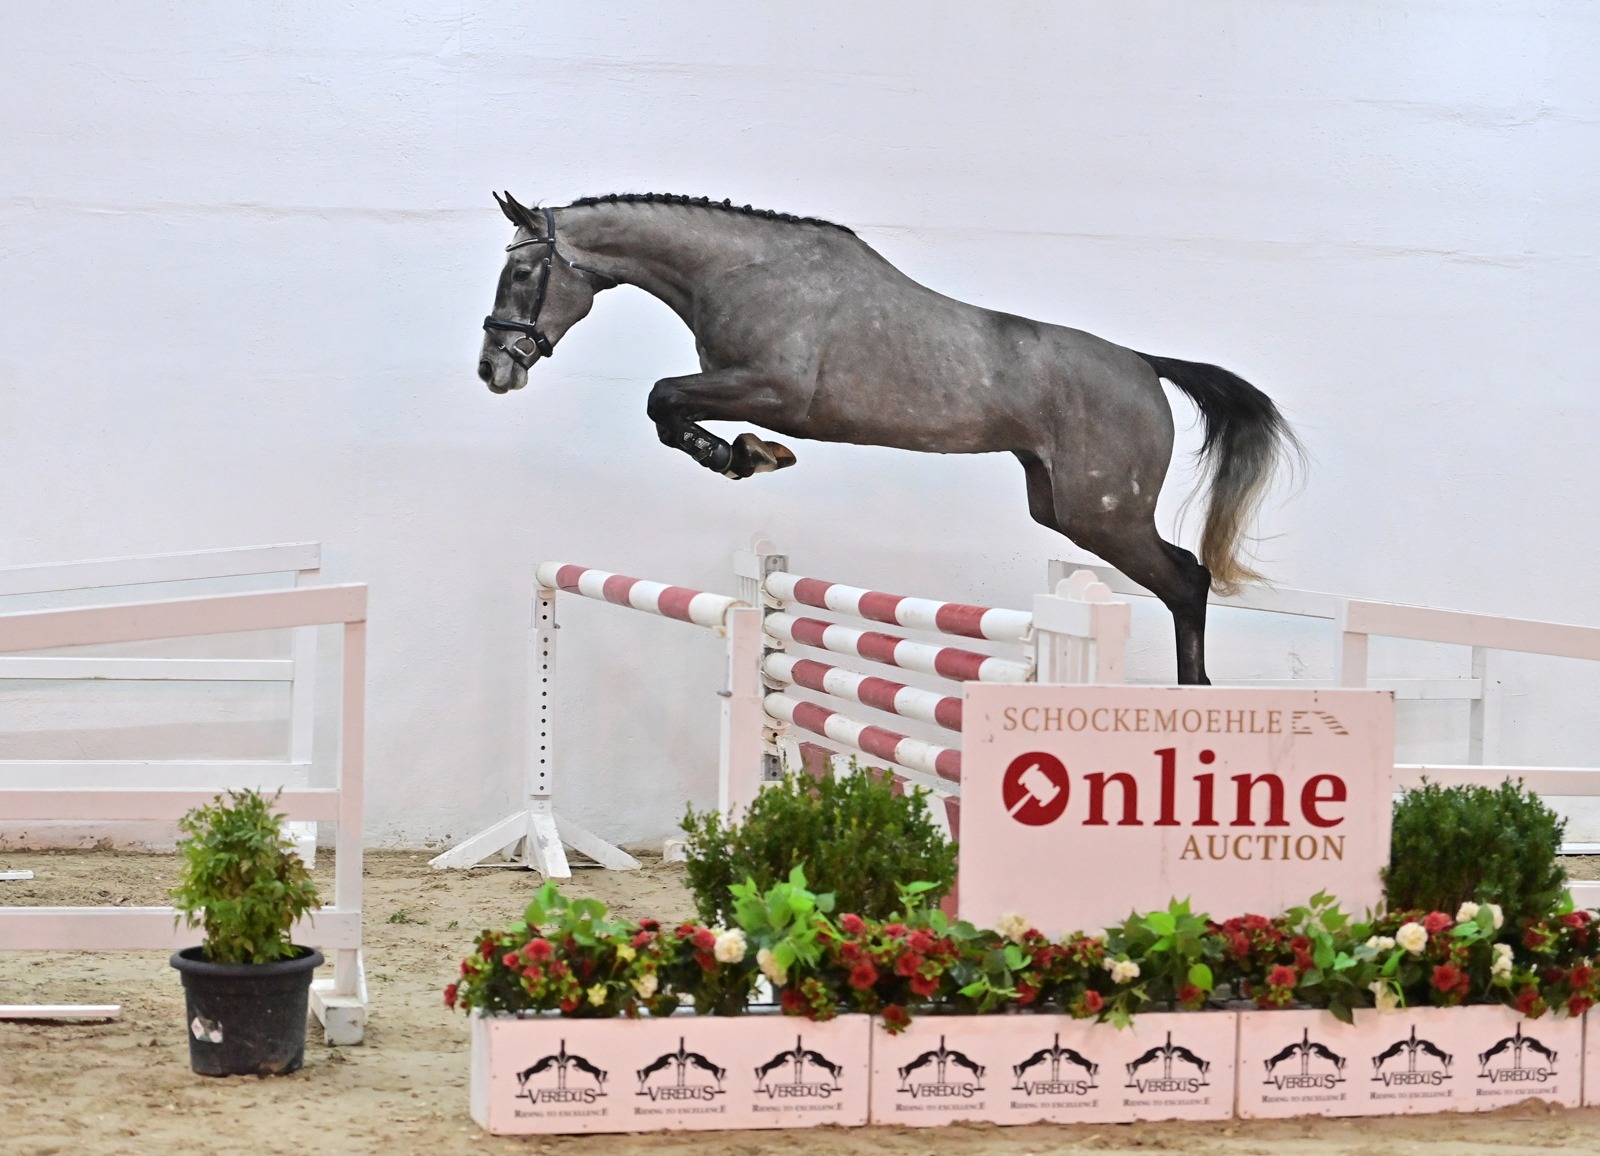 Schockemoehle Online Auction - Young Jumpers: Kollektion Online